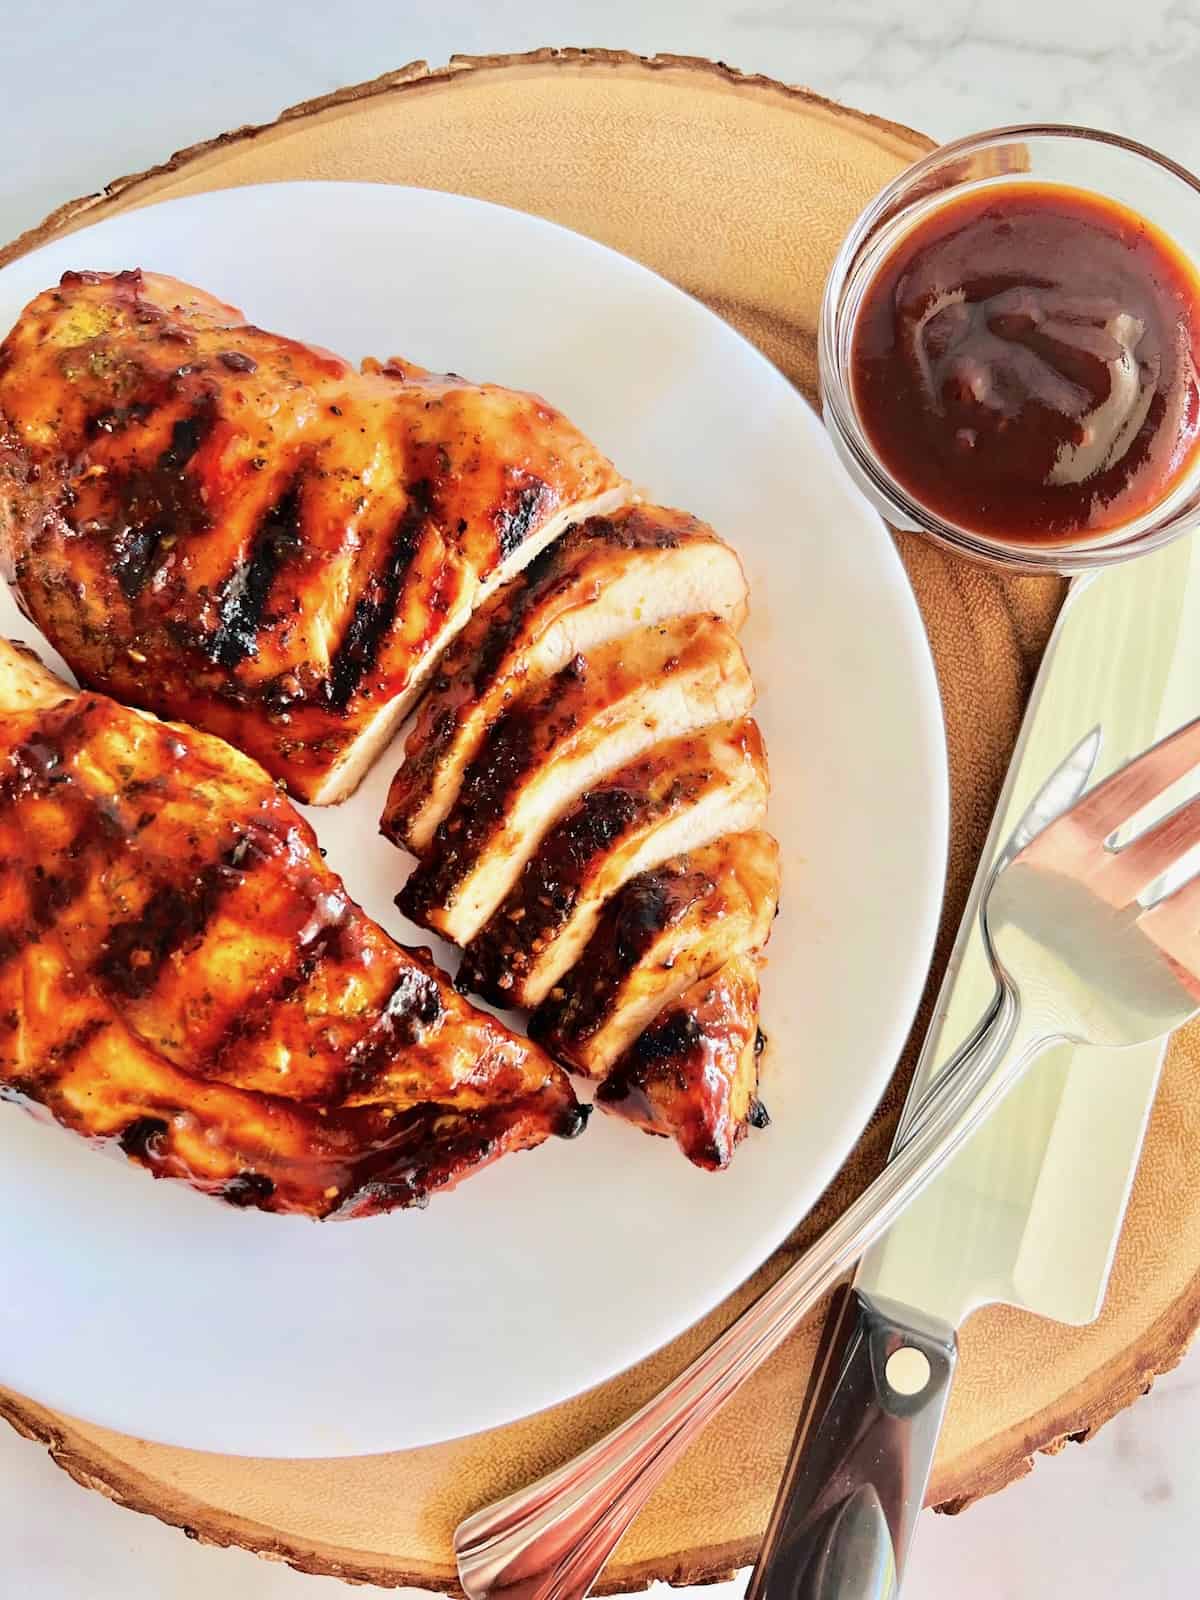 Grilled BBQ Chicken Breasts Served on a plate with some slices plus bowl of bbq sauce and utensils on the side.